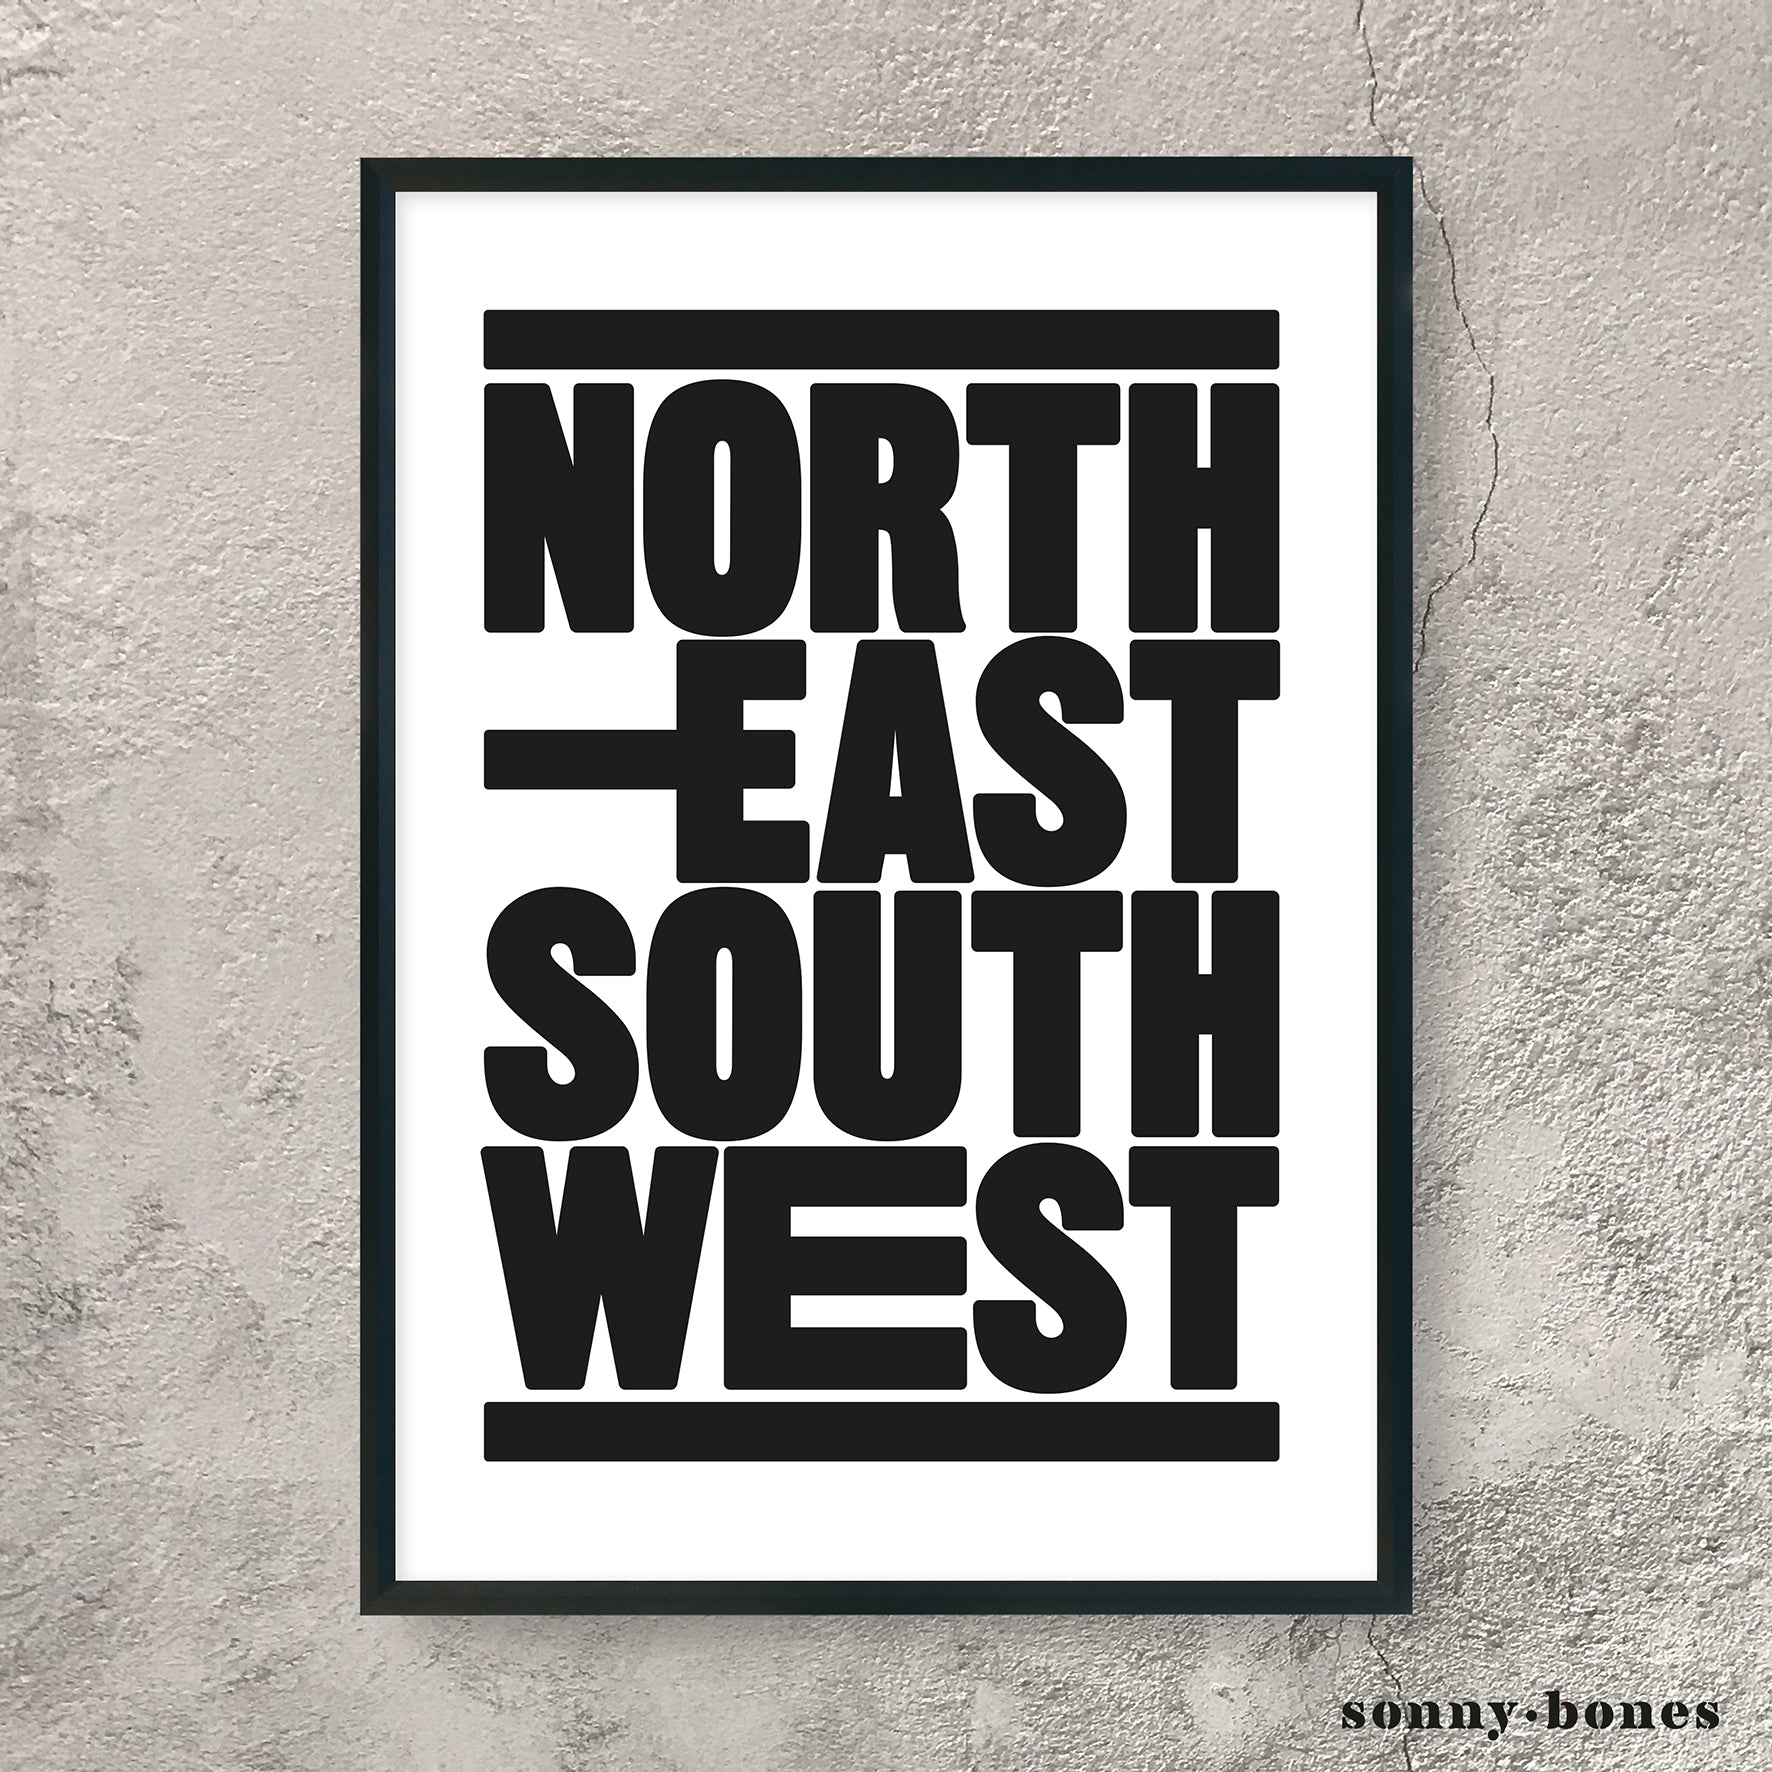 NORTH EAST SOUTH WEST (black/white)